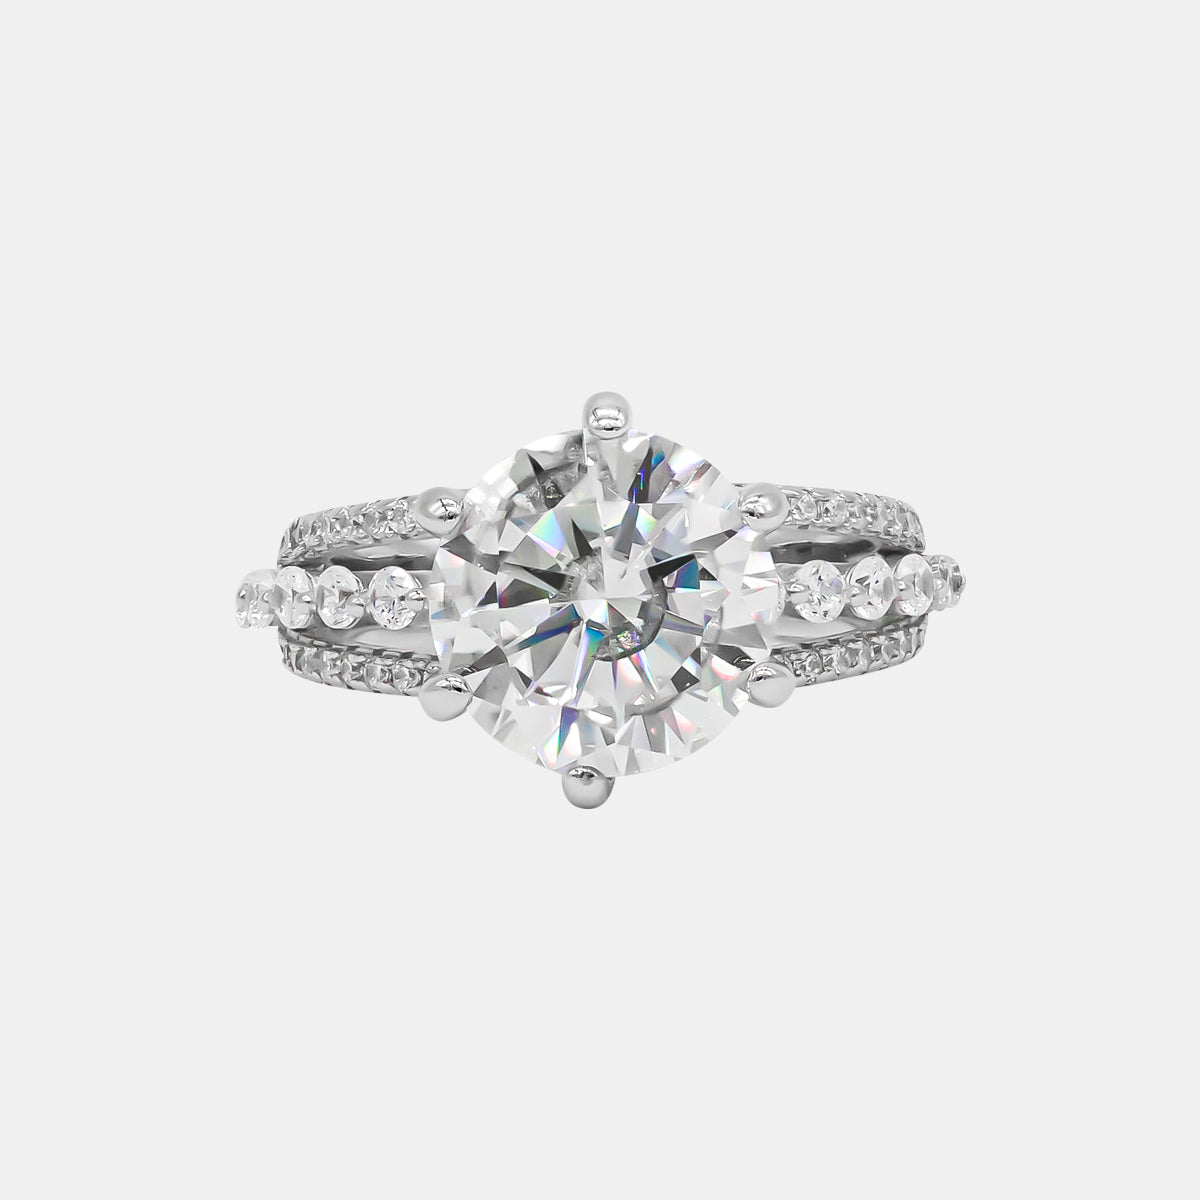 【787】Timeless Grace Majestic Solitaire 5 Carat Moissanite Crown Dating Ring